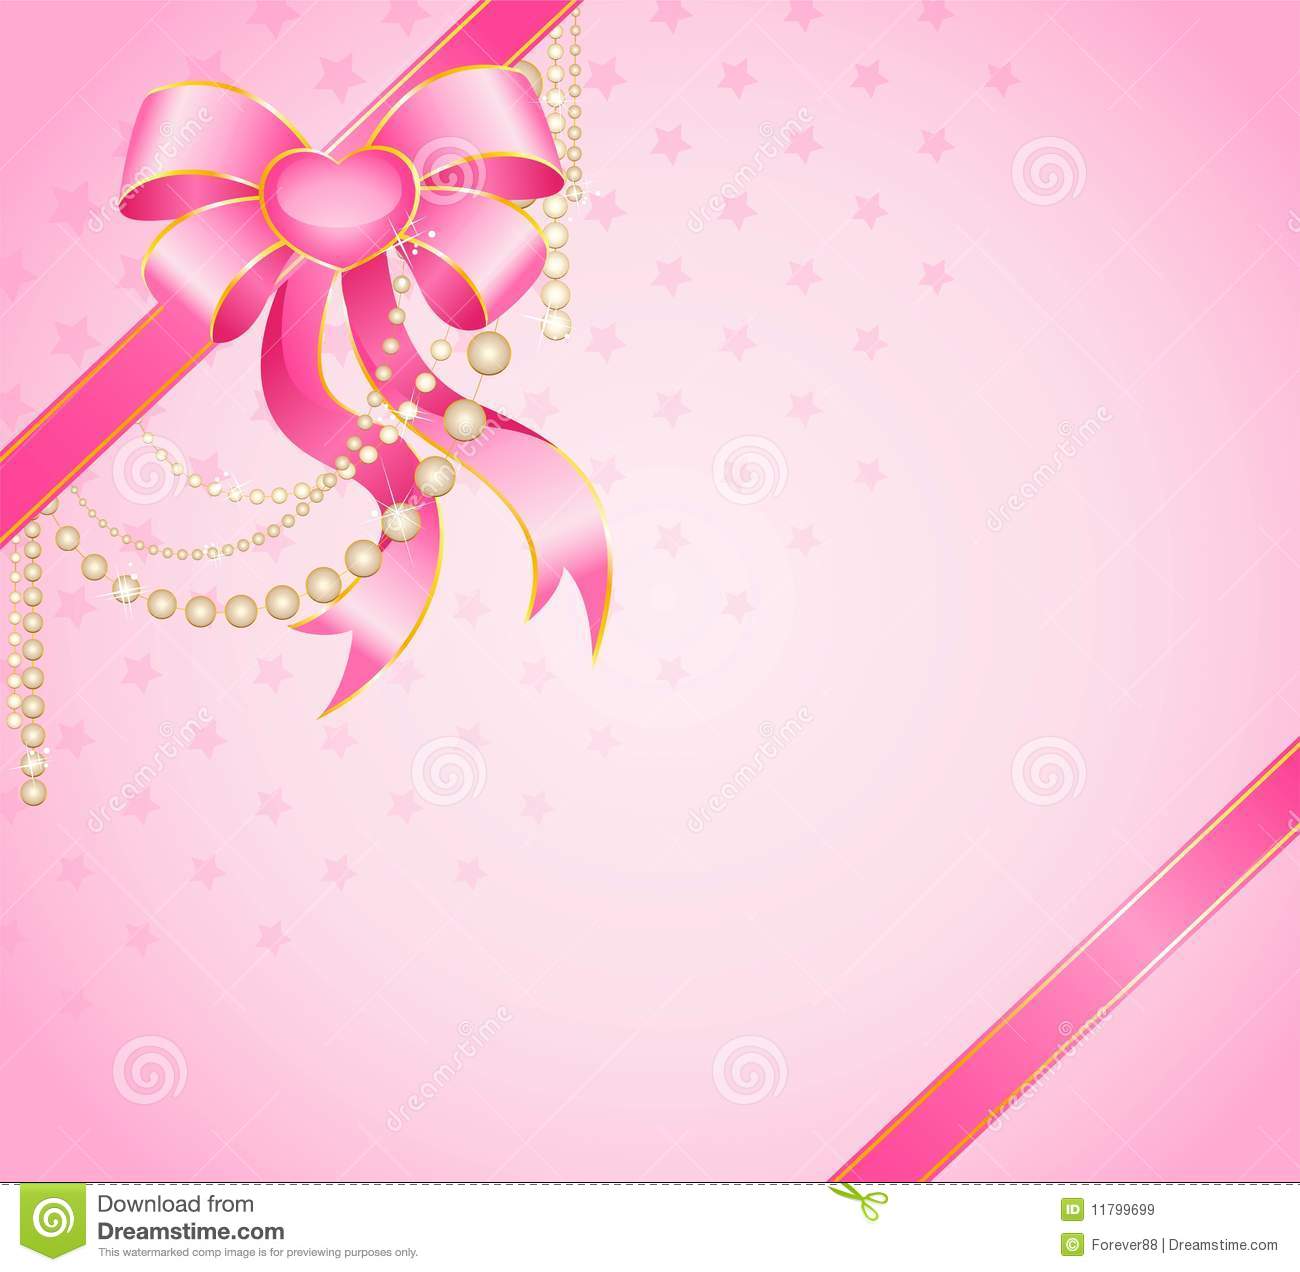 Big Pink Bow Royalty Free Stock Images   Image  11799699